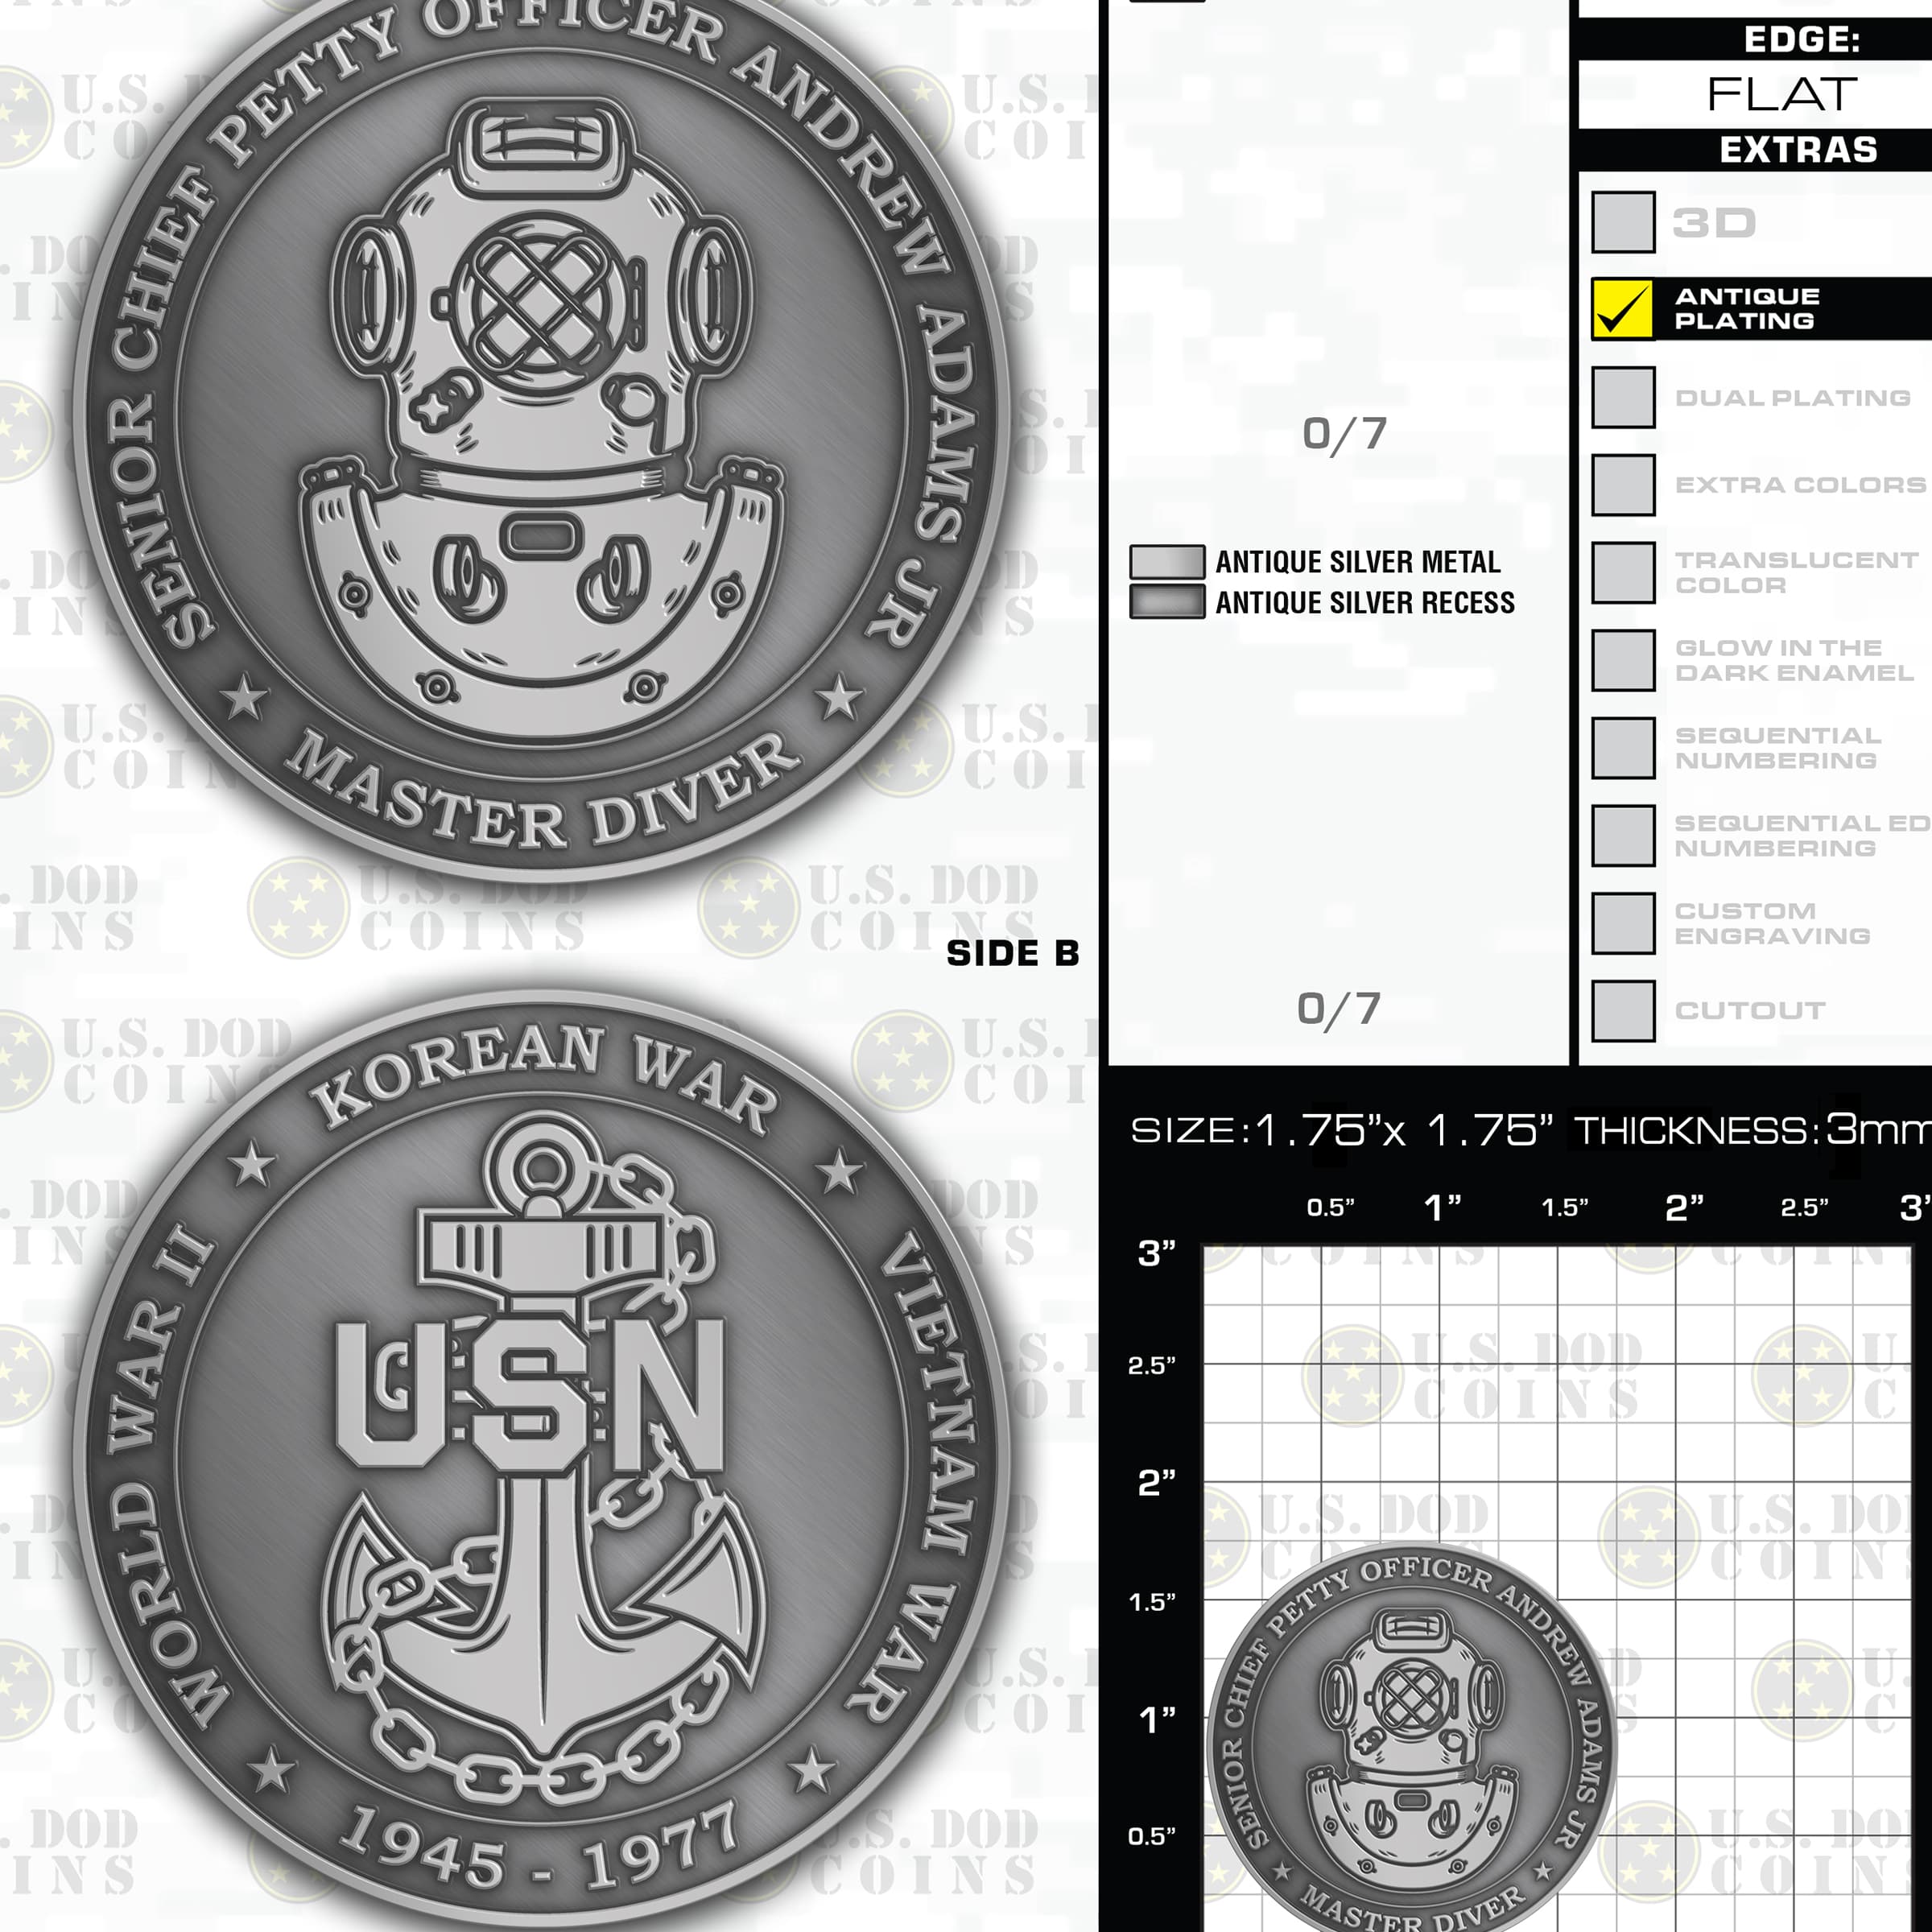 Senior-Chief-Petty-Officer-Andrew-Adams-Jr---Challenge-Coin_0001_PROOF-6-(1)